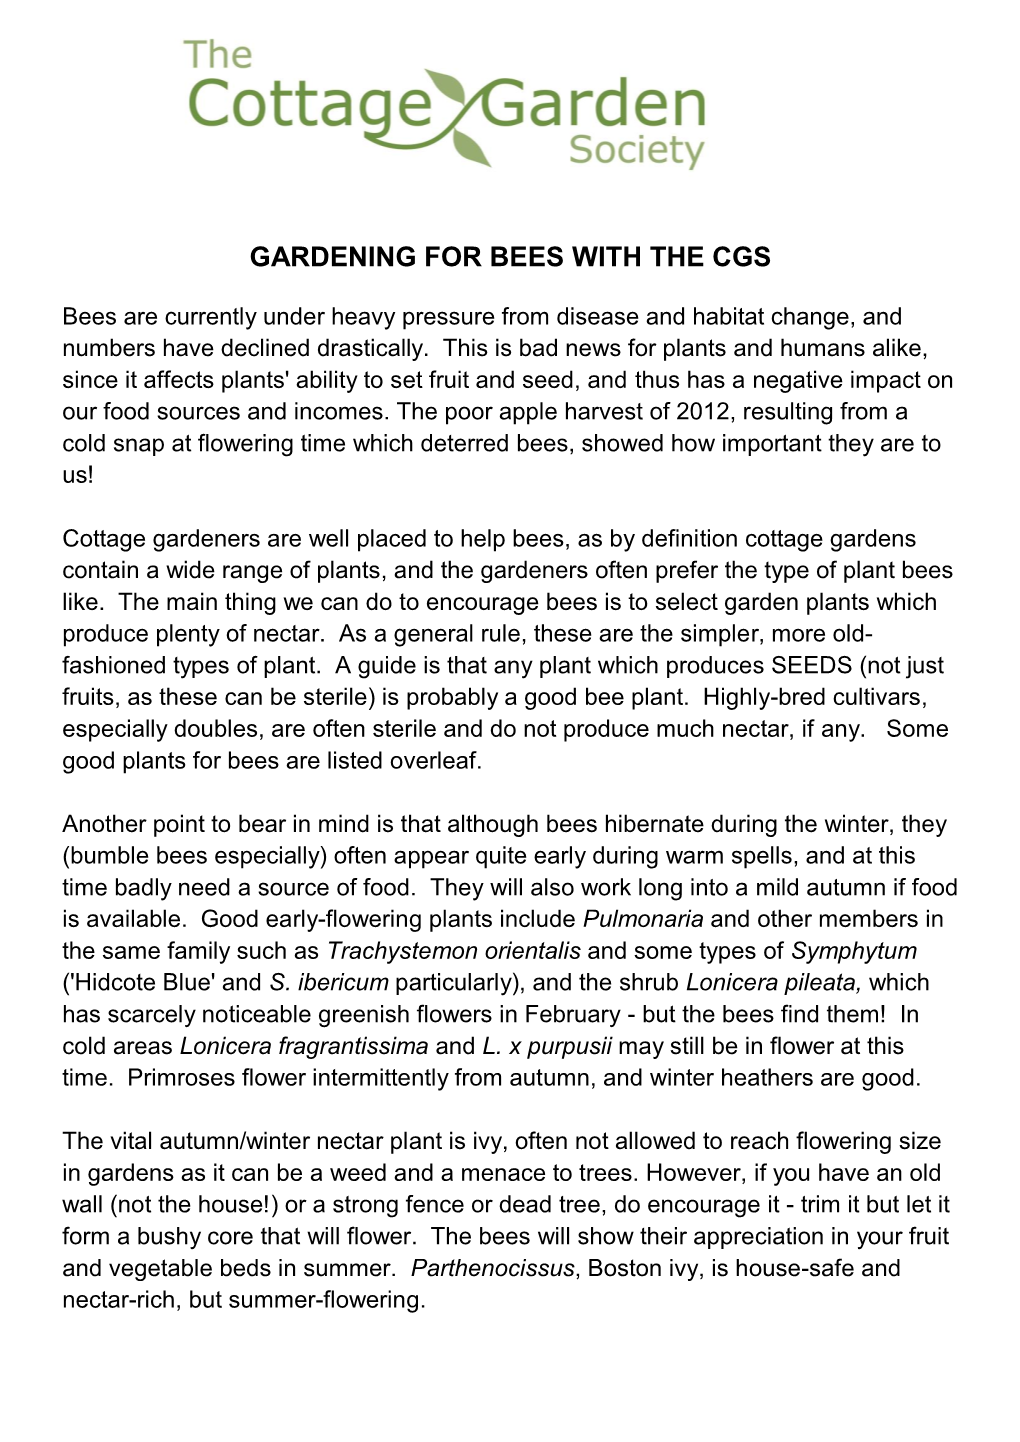 Gardening for Bees with the Cgs